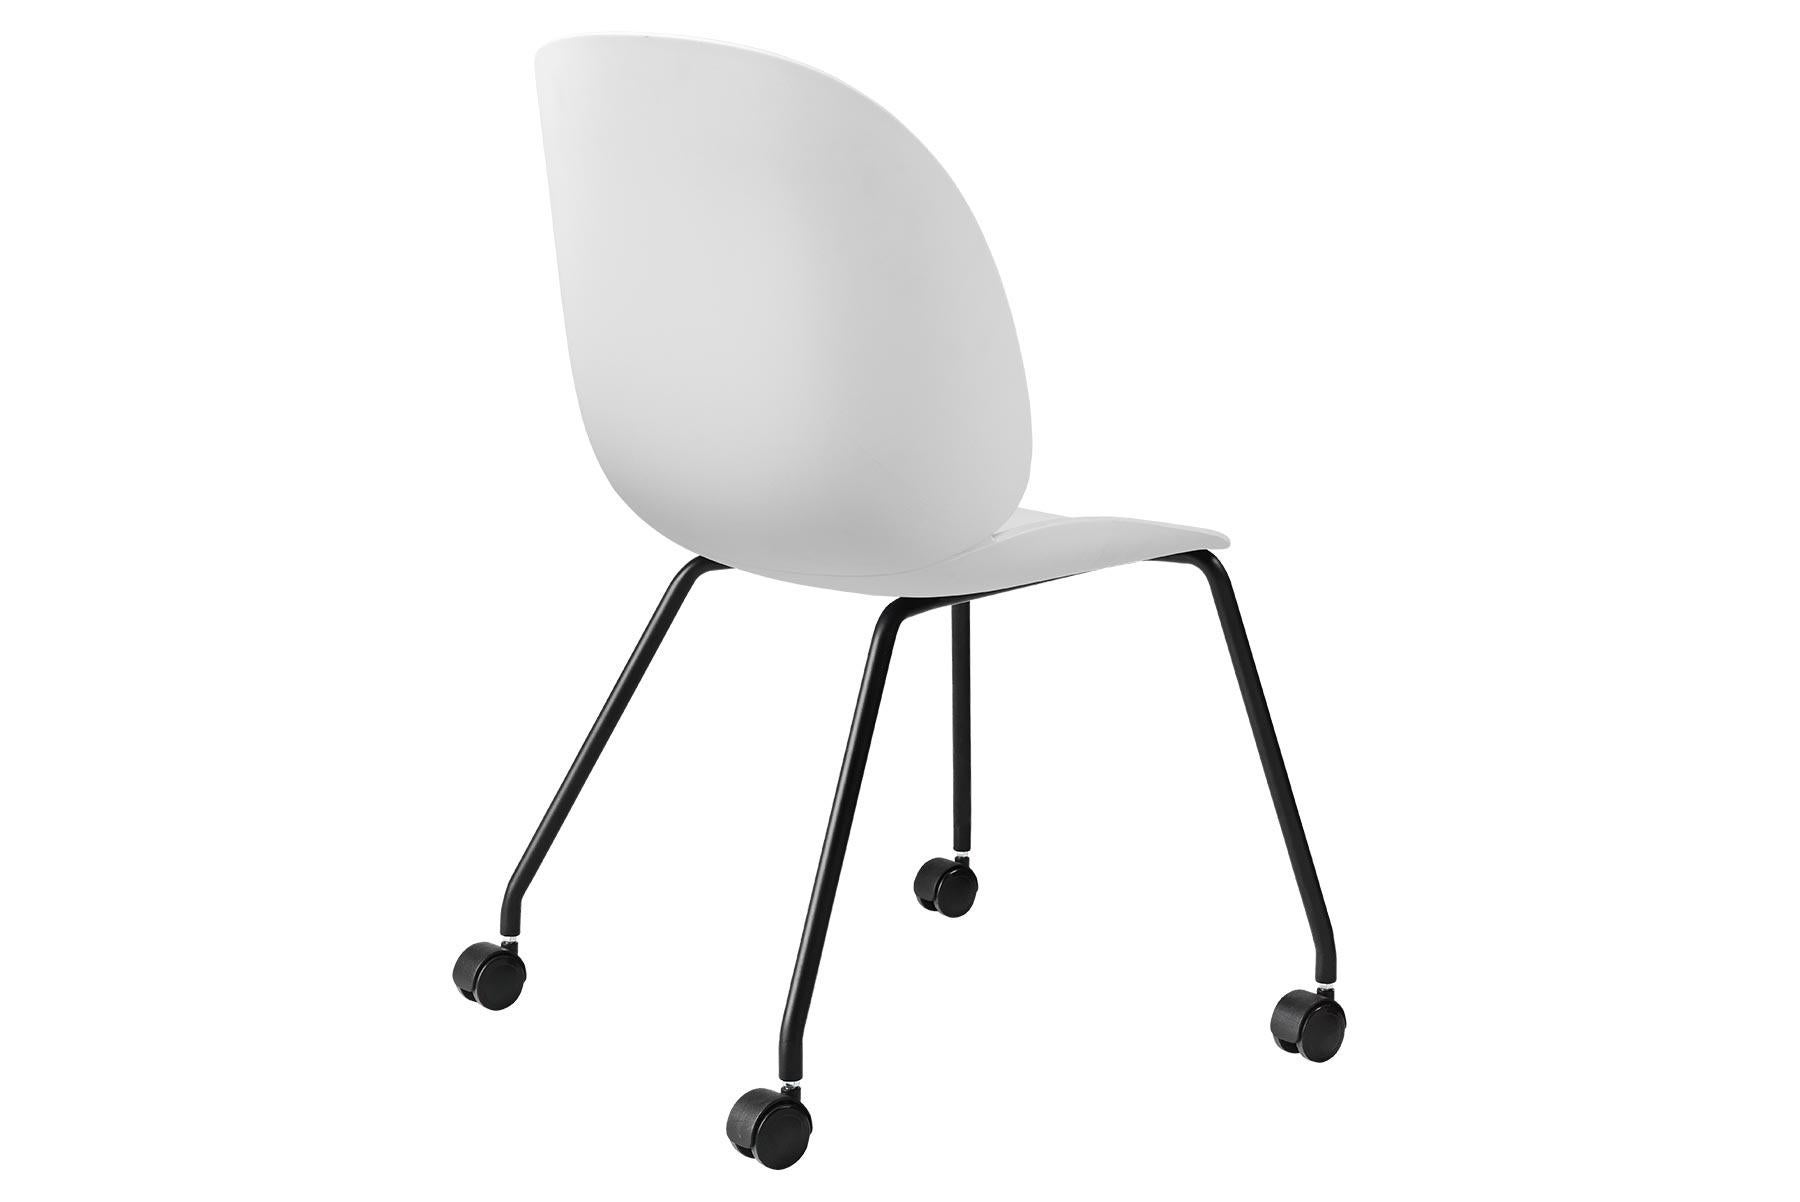 Steel Beetle Meeting Chair, Un-Upholstered, 4 Legs with Castors For Sale